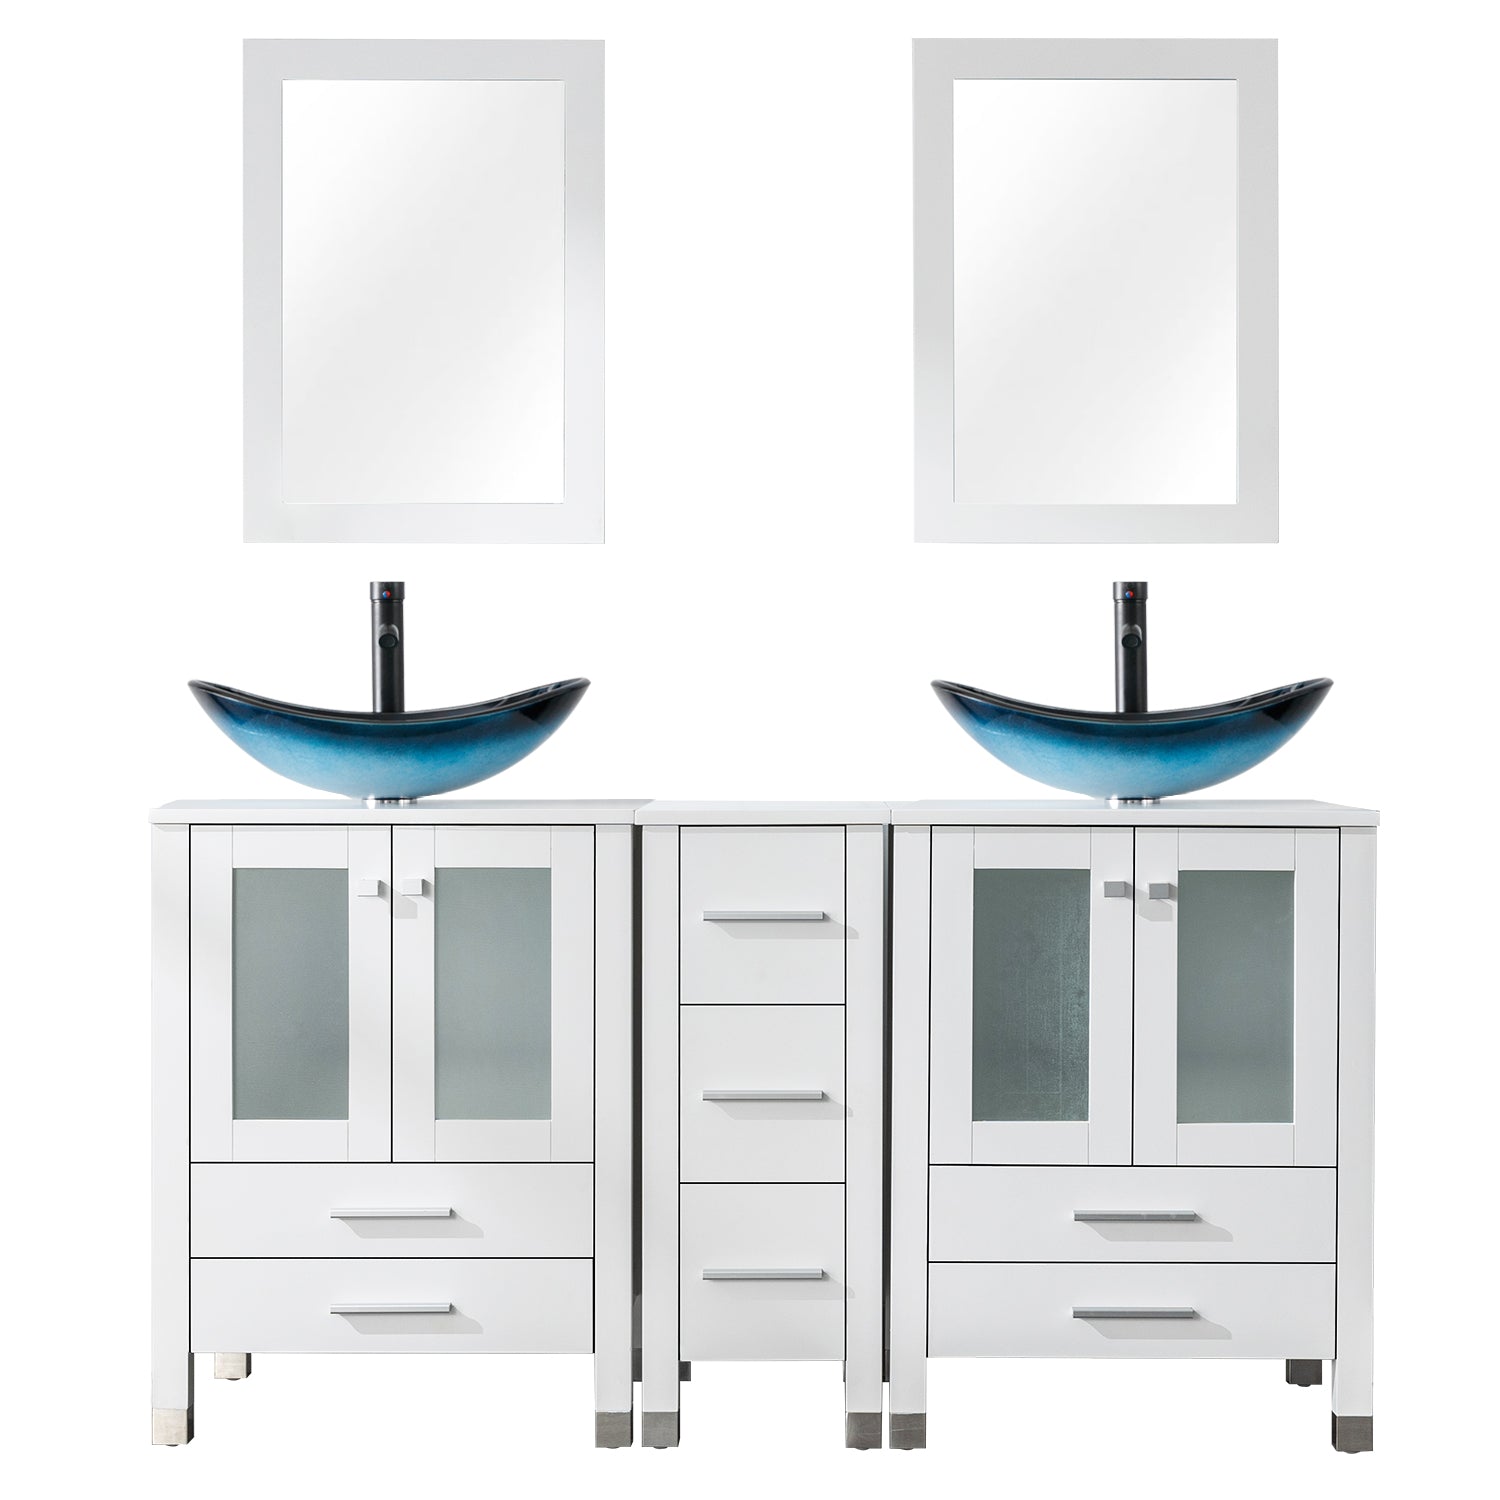 Eclife 60" Double Bathroom Vanity Sink Combos, Solid Wood Construction and Painted Frame - White